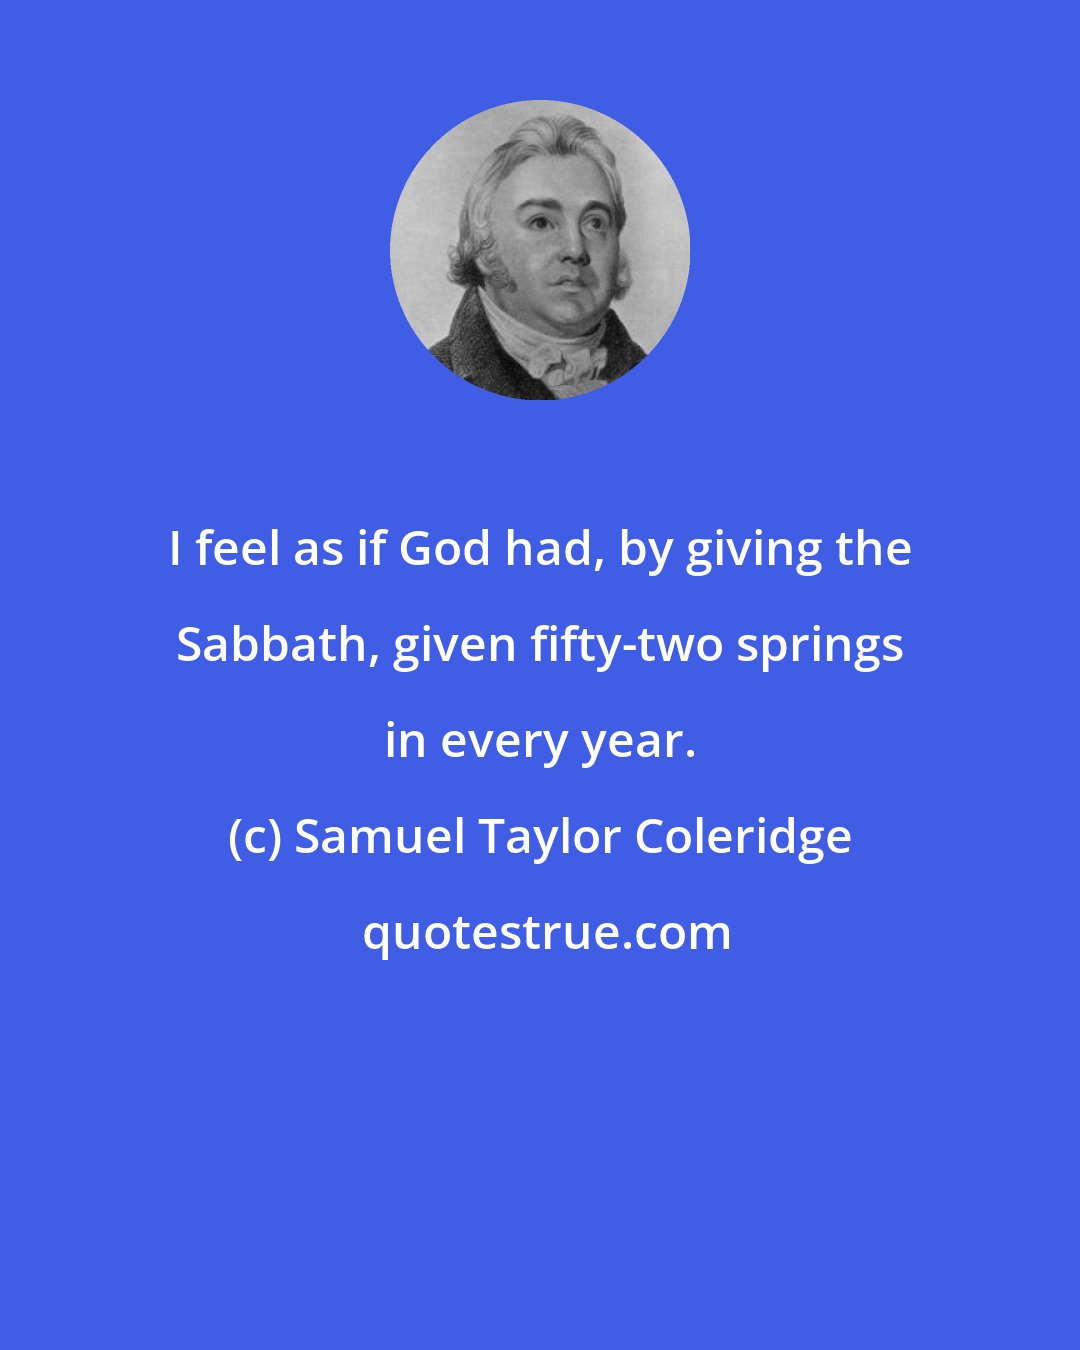 Samuel Taylor Coleridge: I feel as if God had, by giving the Sabbath, given fifty-two springs in every year.